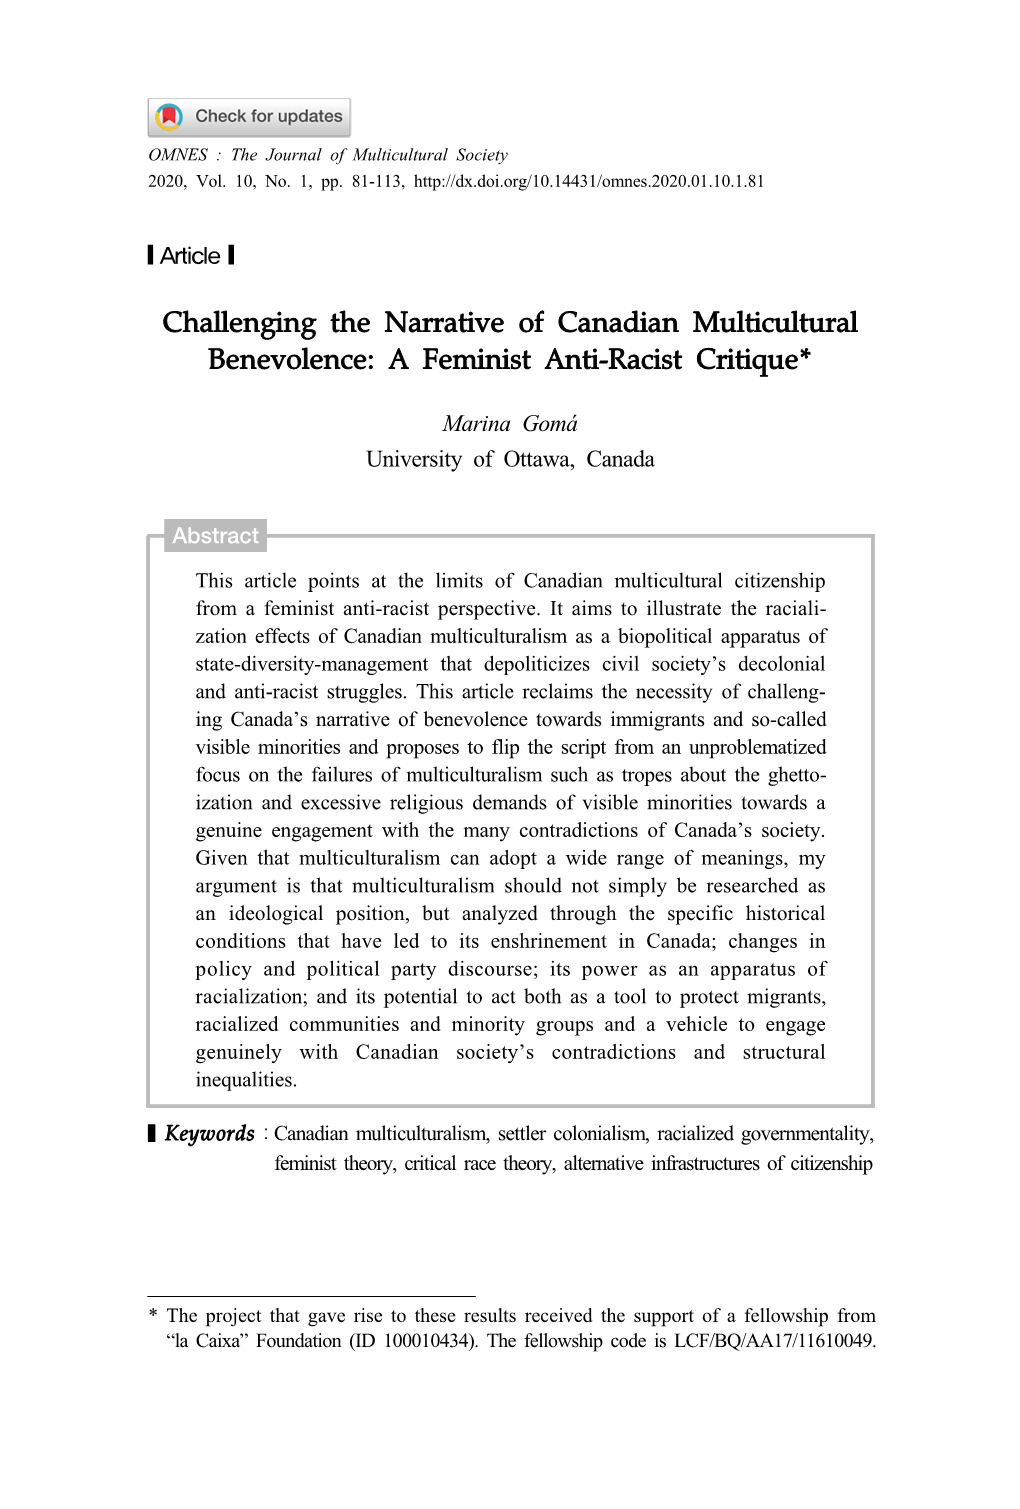 Challenging the Narrative of Canadian Multicultural Benevolence: a Feminist Anti-Racist Critique*